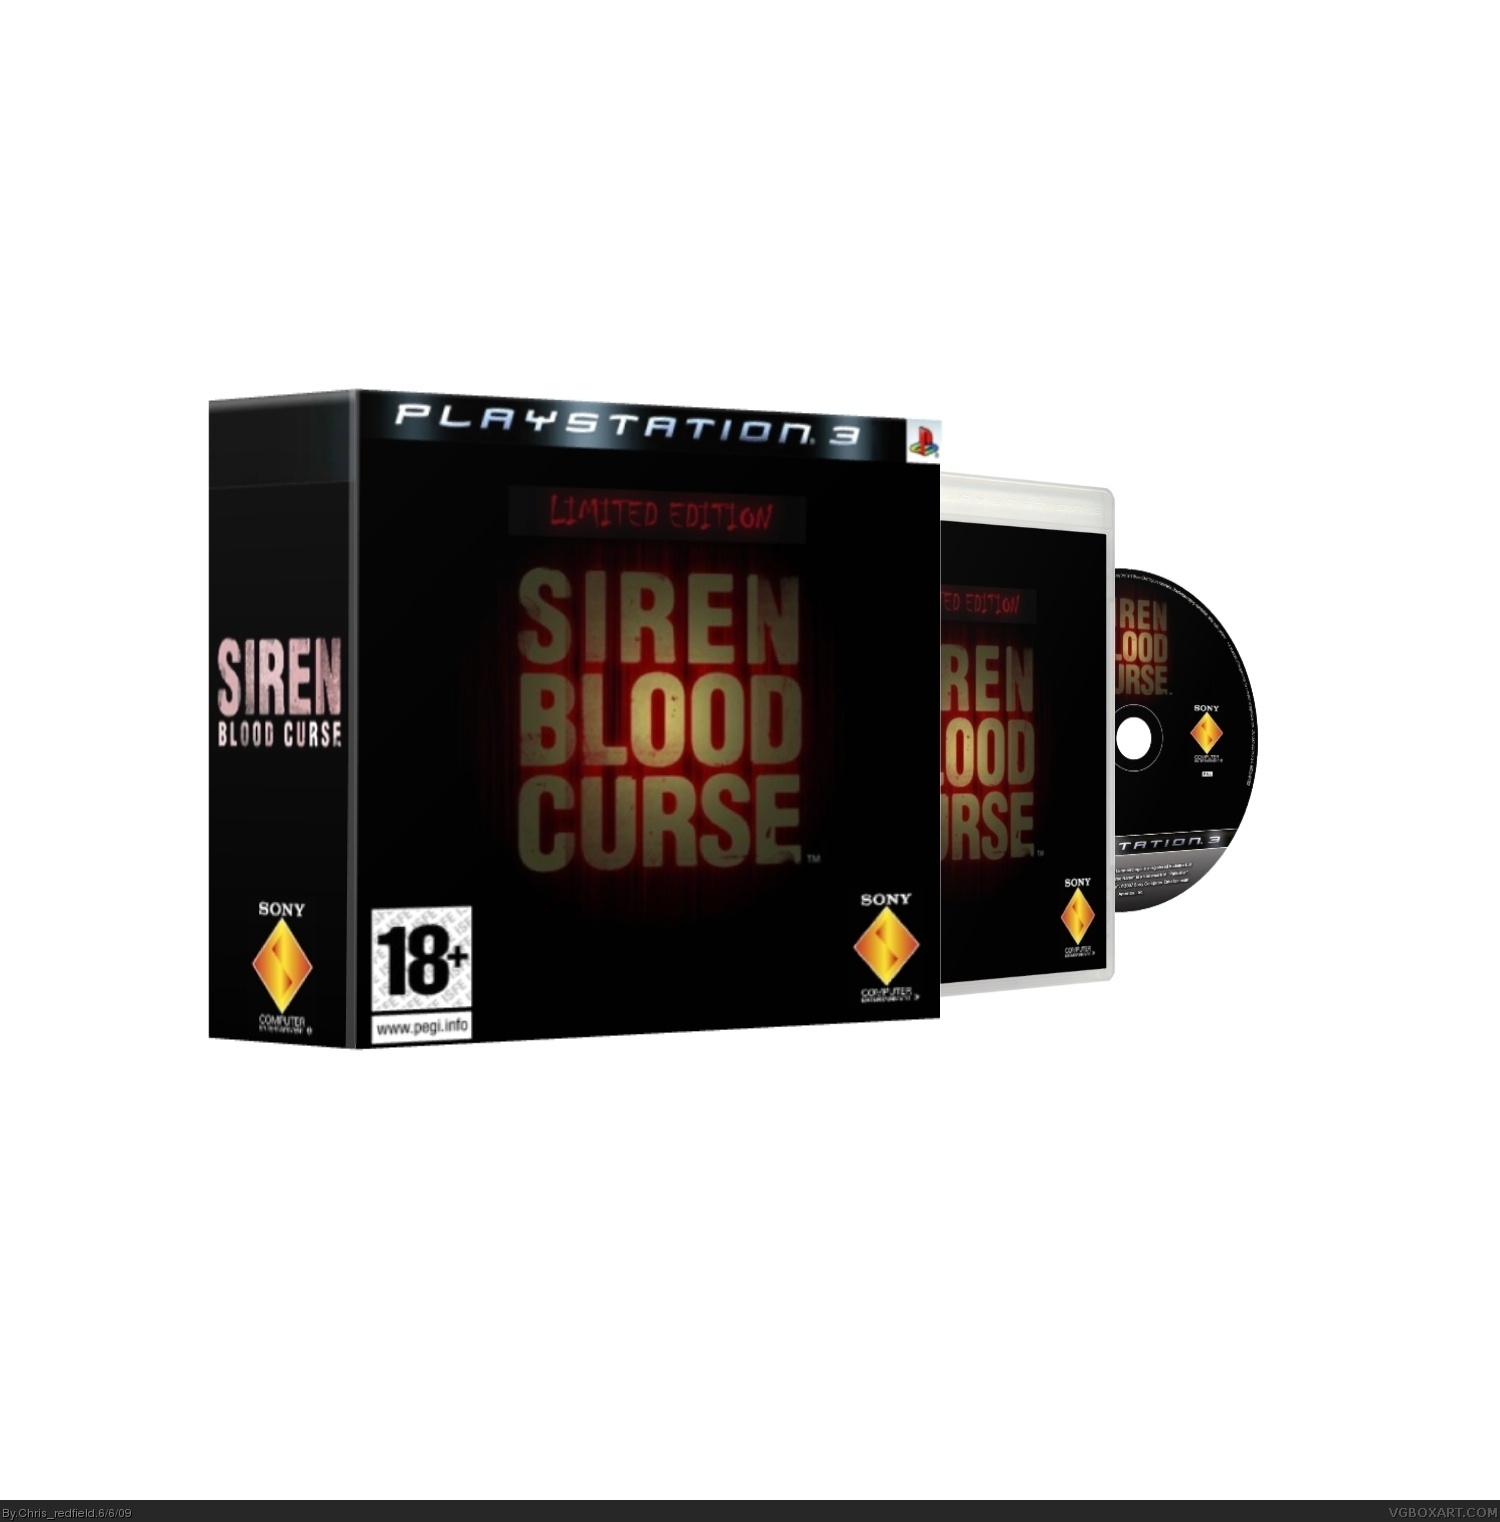 Siren: Blood Curse Limited Edition box cover